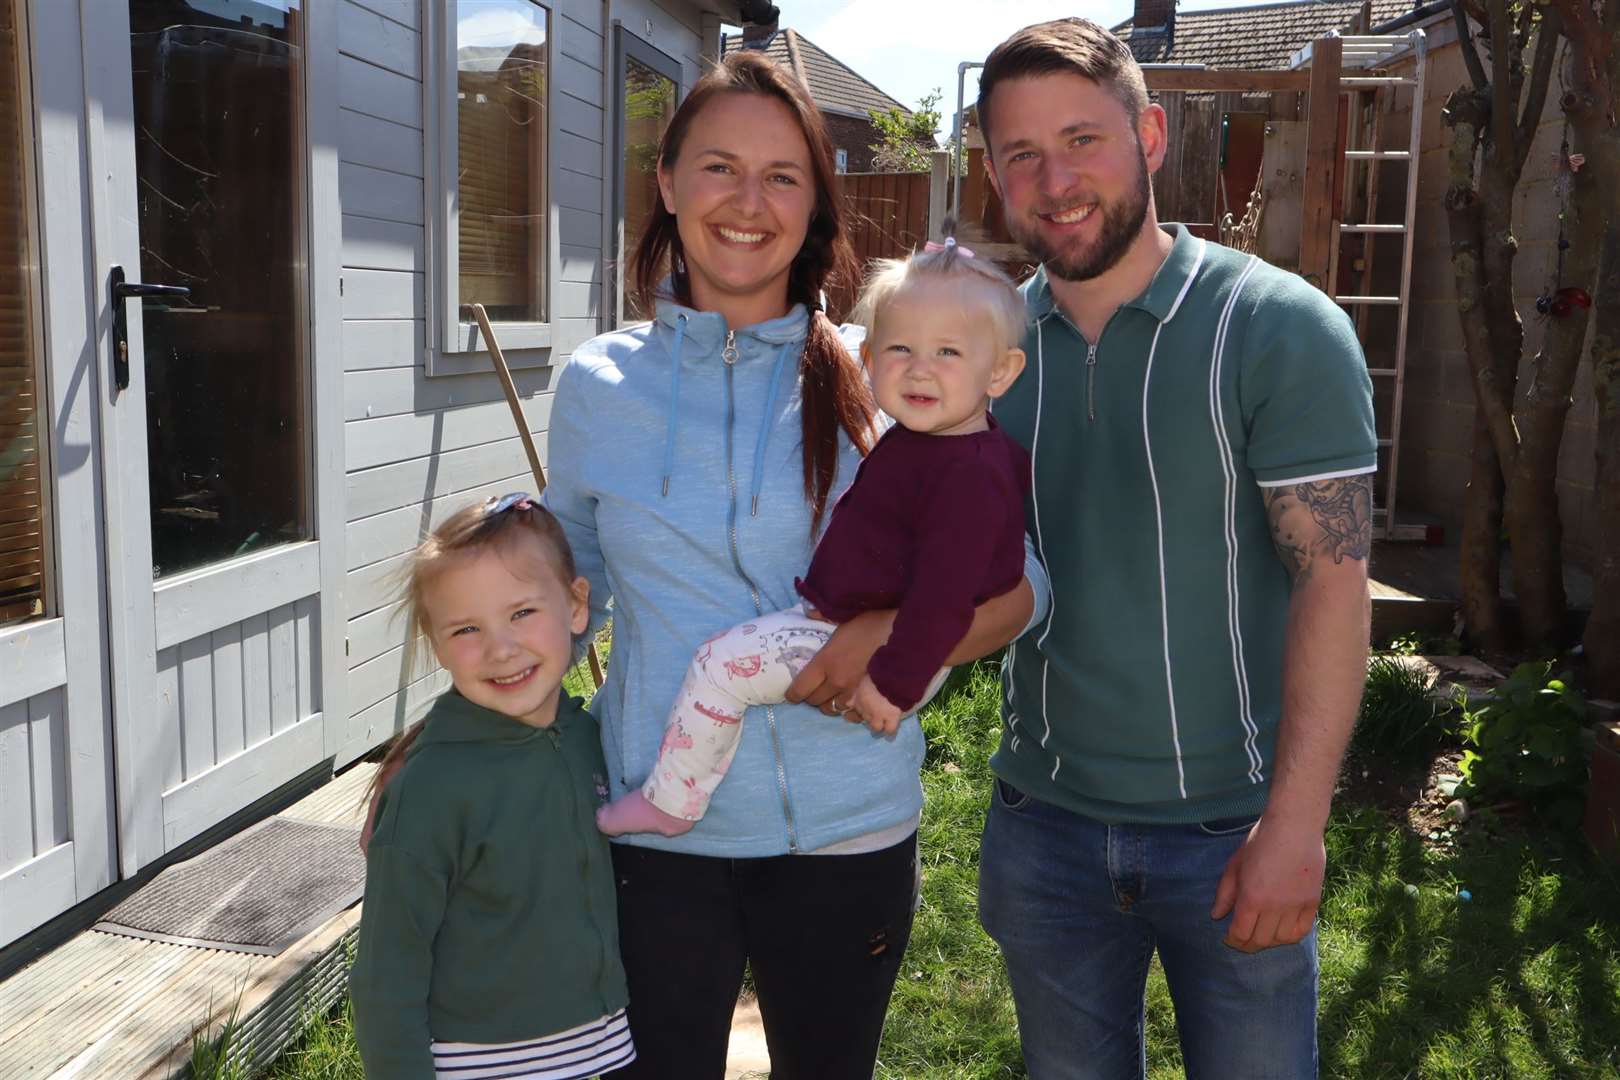 Success: Mum of two Nikki Webster has been given her first Covid jab after a long battle. She's pictured with her partner Danny Webster and daughters Scarlet and Maya at their home in New Road, Minster, Sheppey